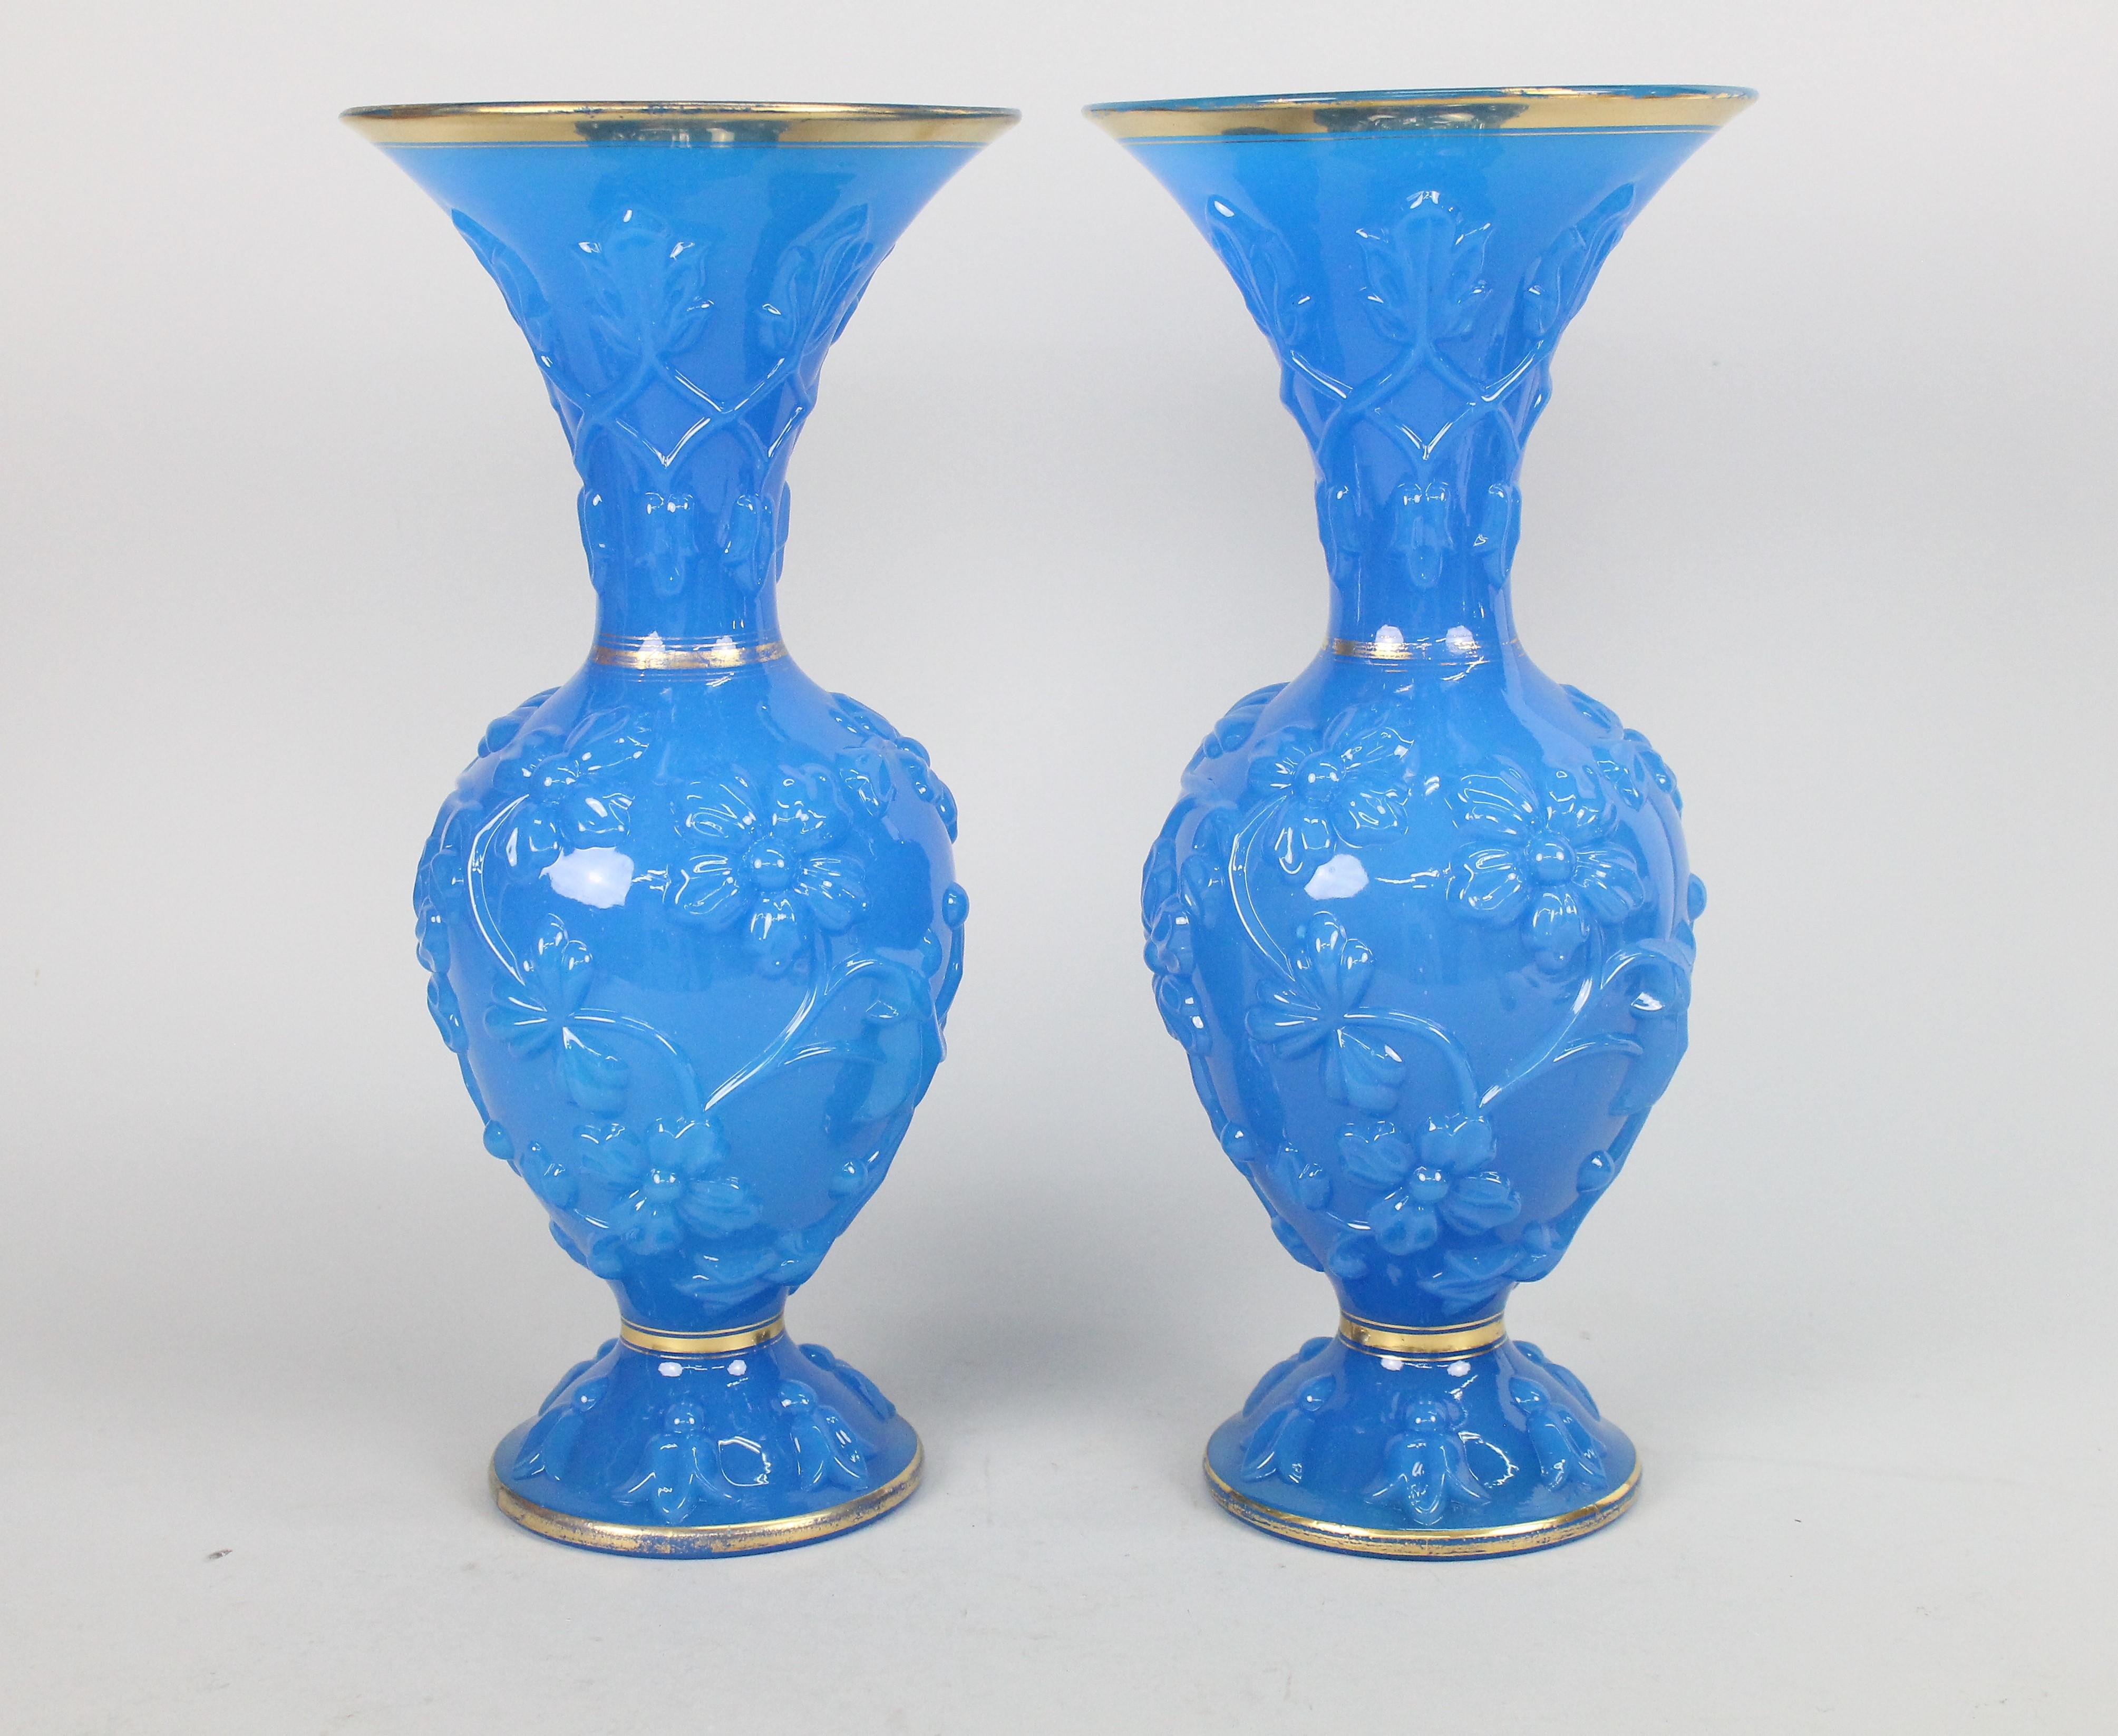 A beautiful pair of antique blue opaline glass Baccarat vases.
Made by Baccarat in France between 1845-1870. Blue moulded opaline glass with gilding.

Good condition with some rubbing to gilding due to age. No other issues!

Measure: Height